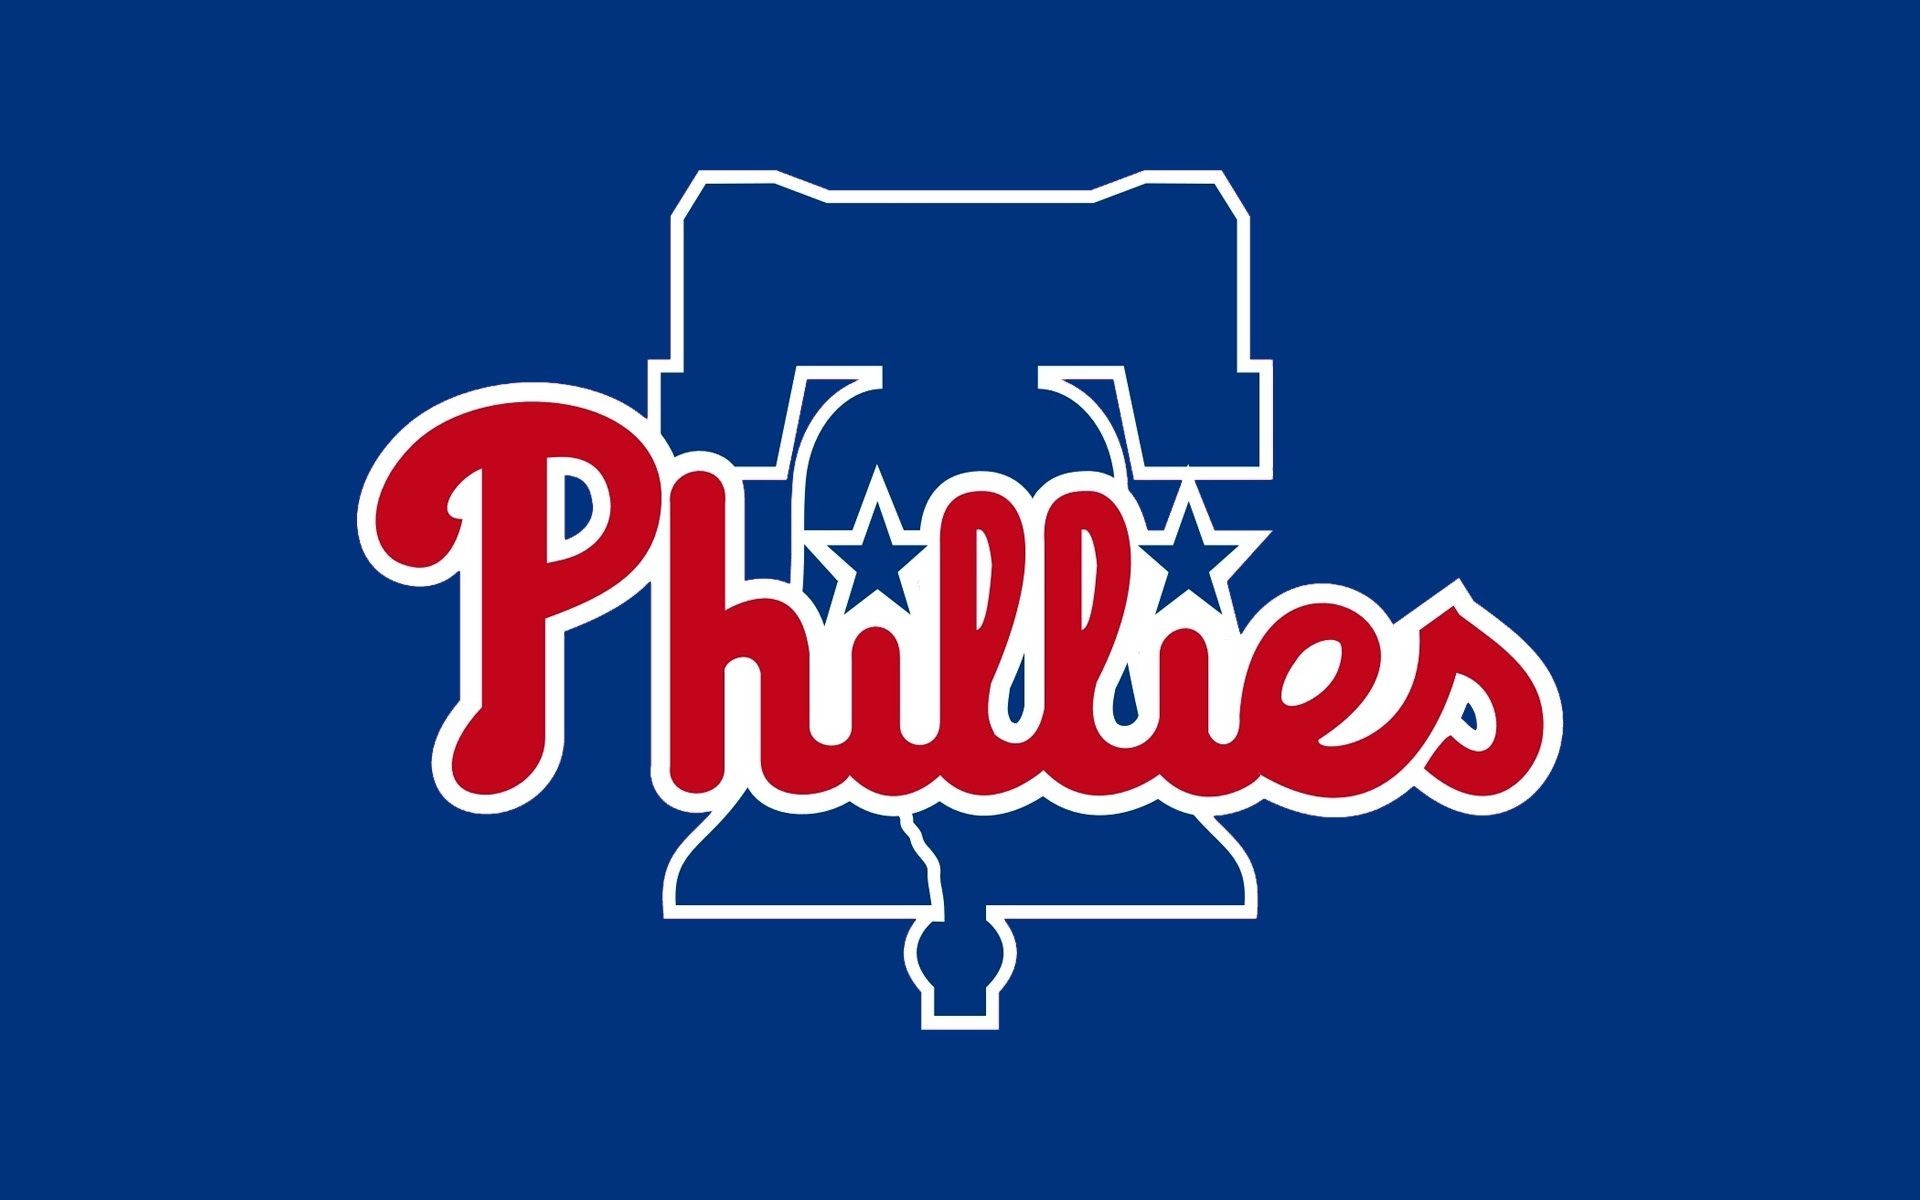 1920x1200 Philadelphia Phillies Full HD Wallpaper and Background Image .